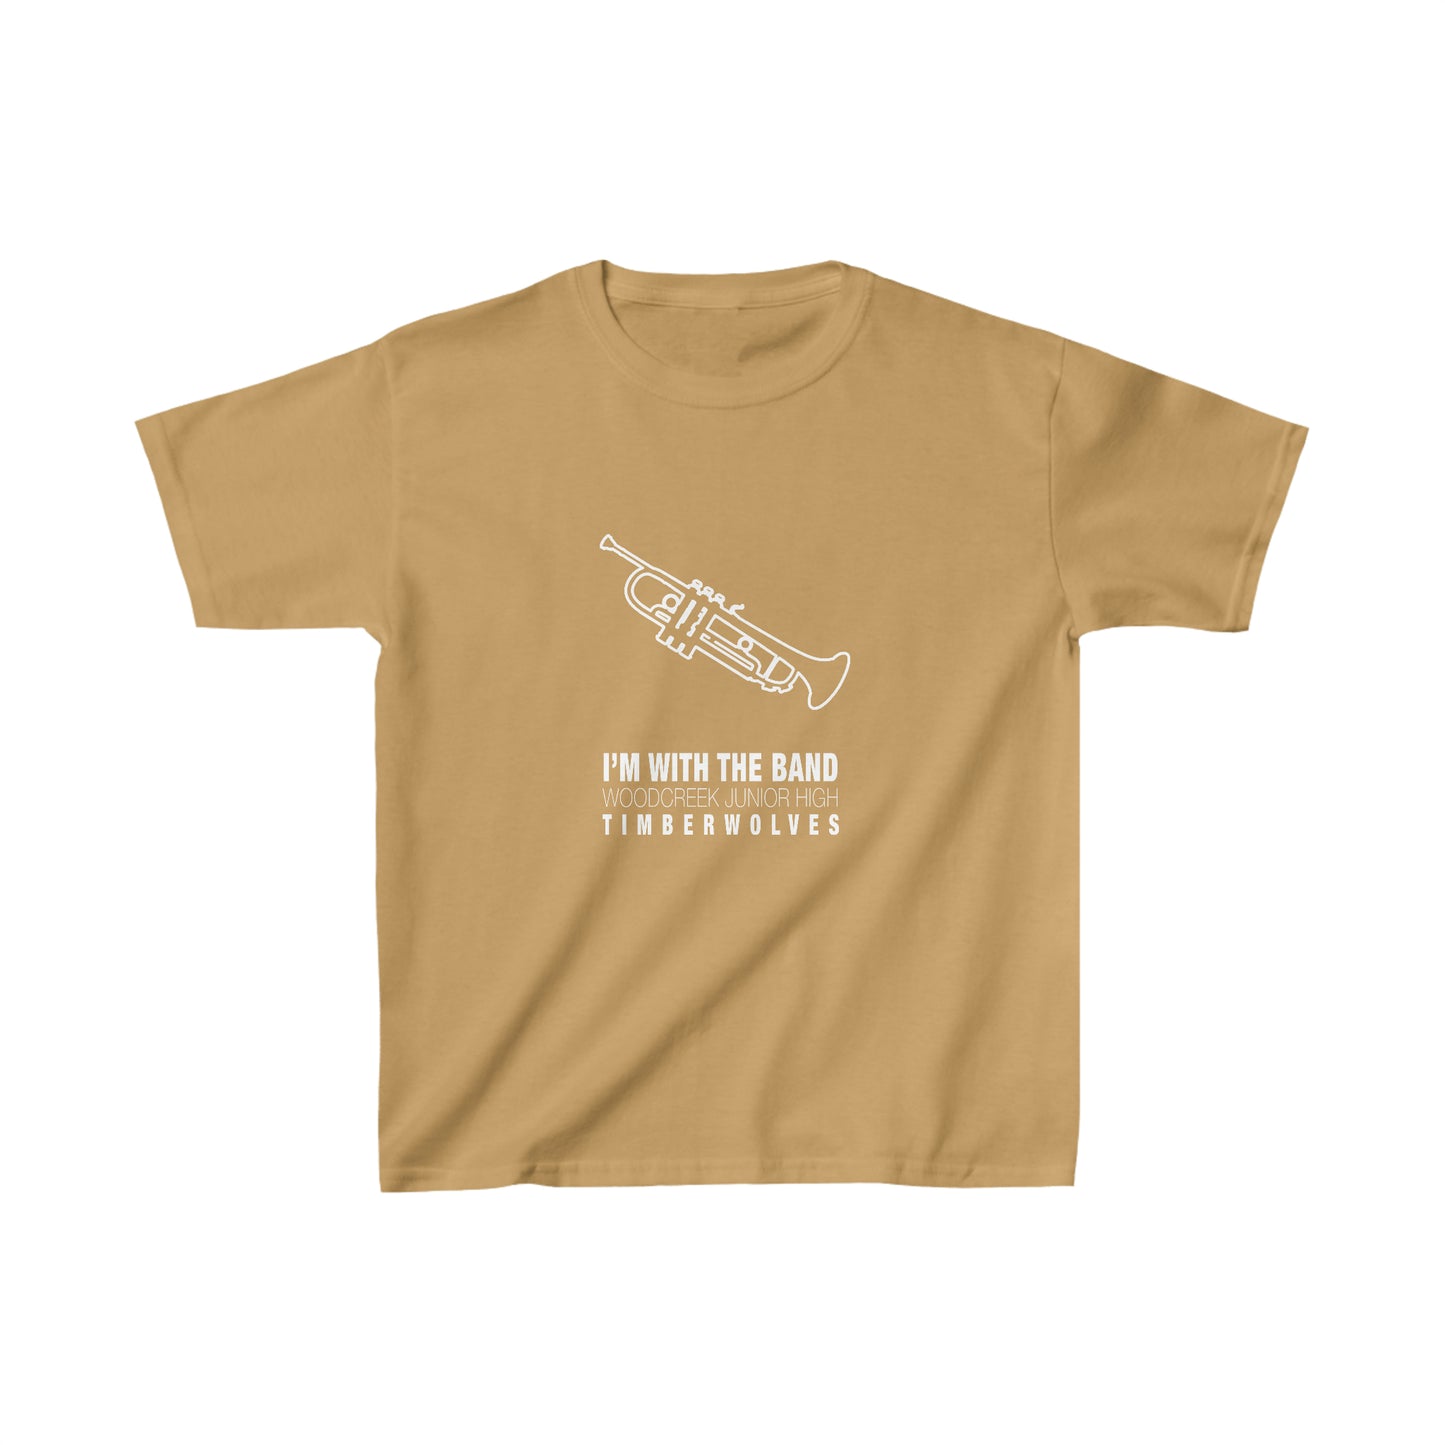 WCJH - I'M WITH THE BAND Youth Trumpet Tee (13 color options)